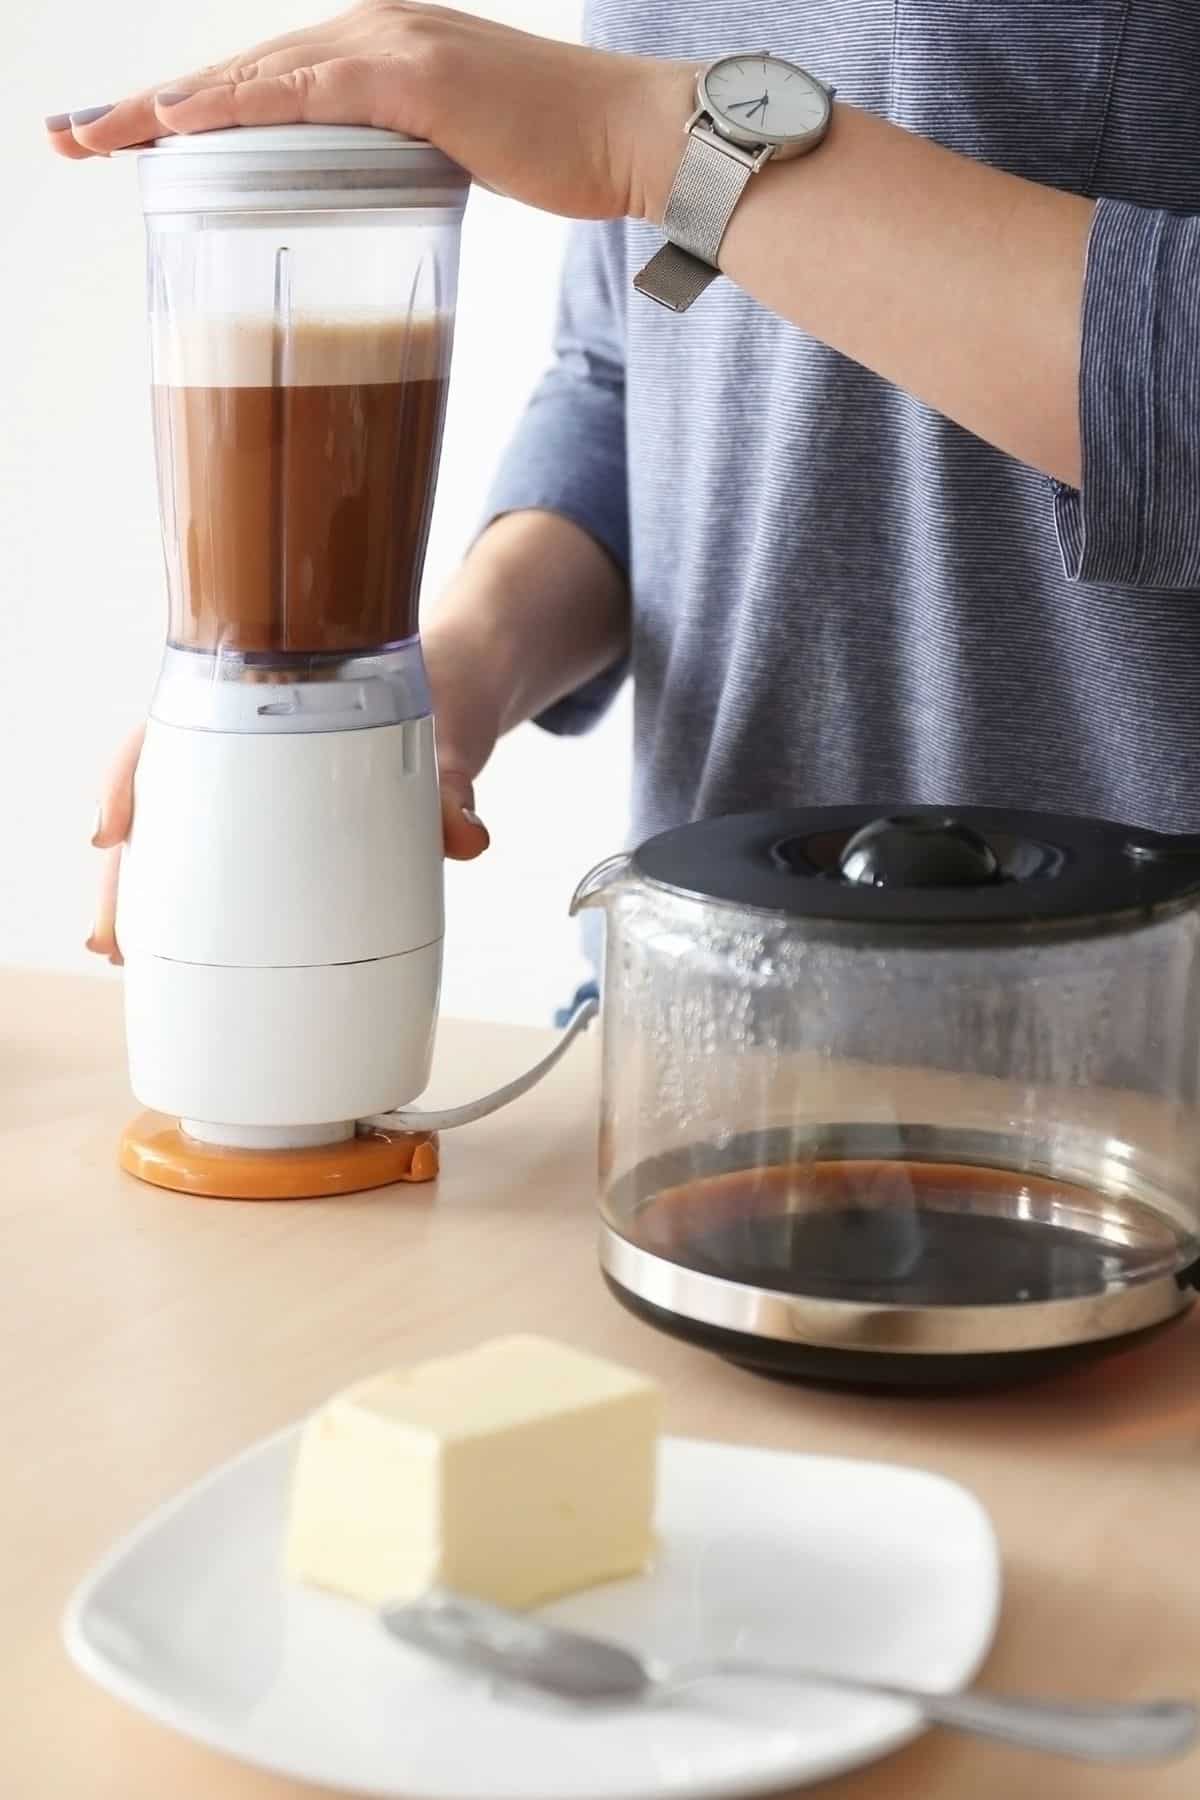 Bulletproof coffee: is adding butter to your brew a step too far